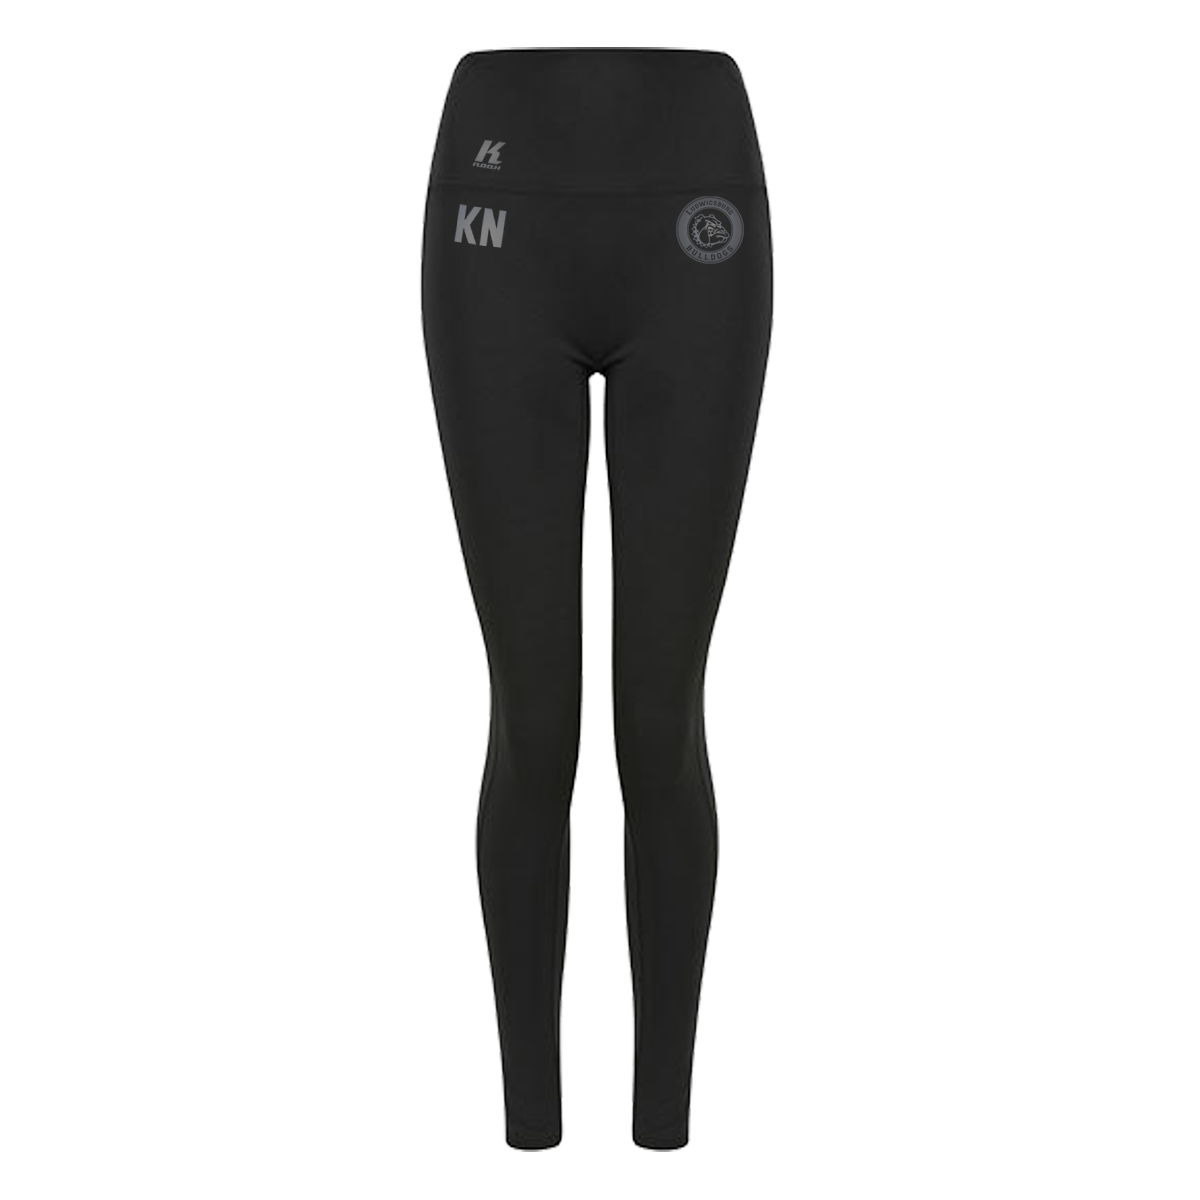 LB-Bulldogs "Blackline" Womens Core Pocket Legging TL370 with Initials/Playernumber